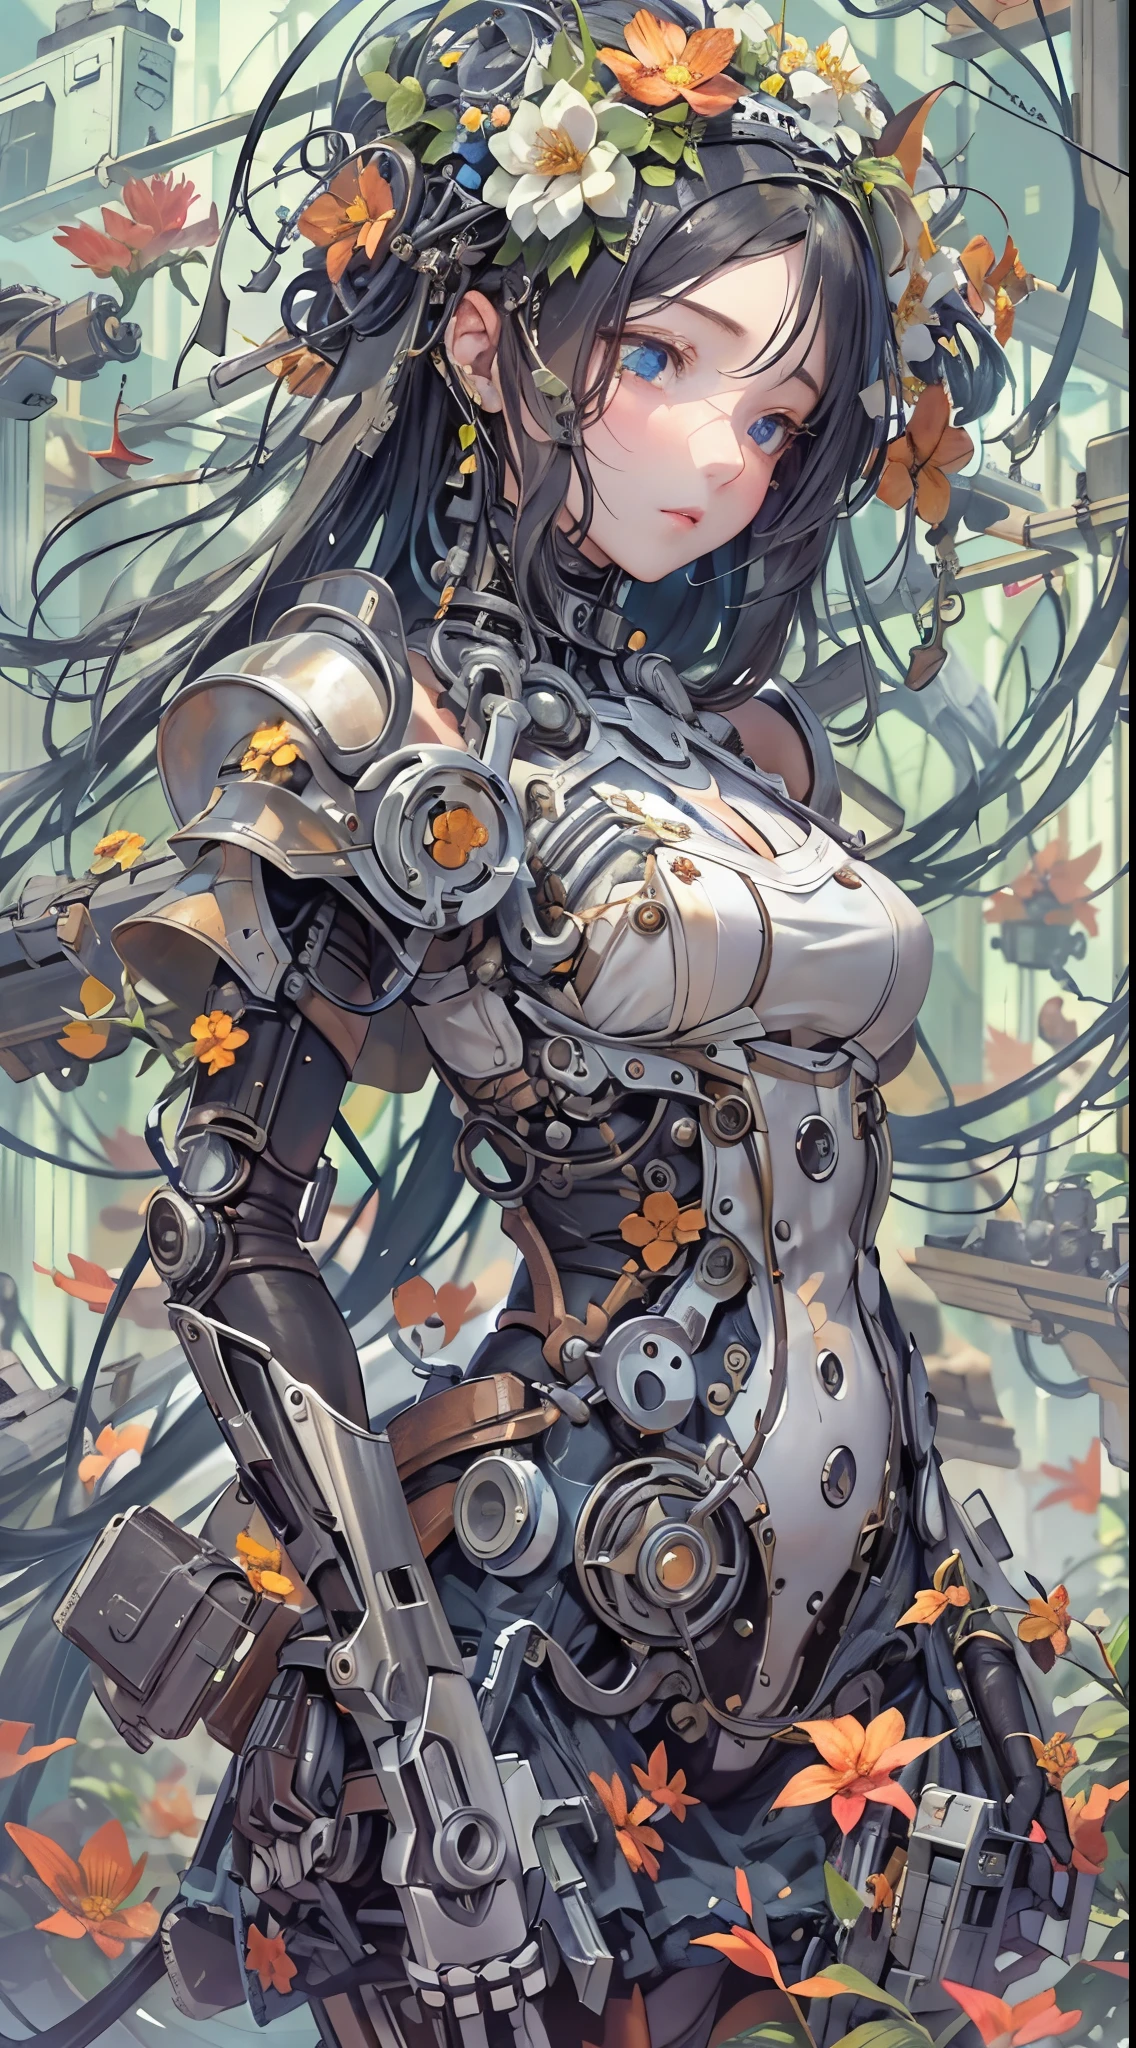 Mechanical anime girl dolls, prosthetic bodies, prosthetic limbs, cables, sleep covered by plants, peace, solemn death, degraded time and space, rainfall, carbonated surfaces, and flowers blooming to fill the gaps.